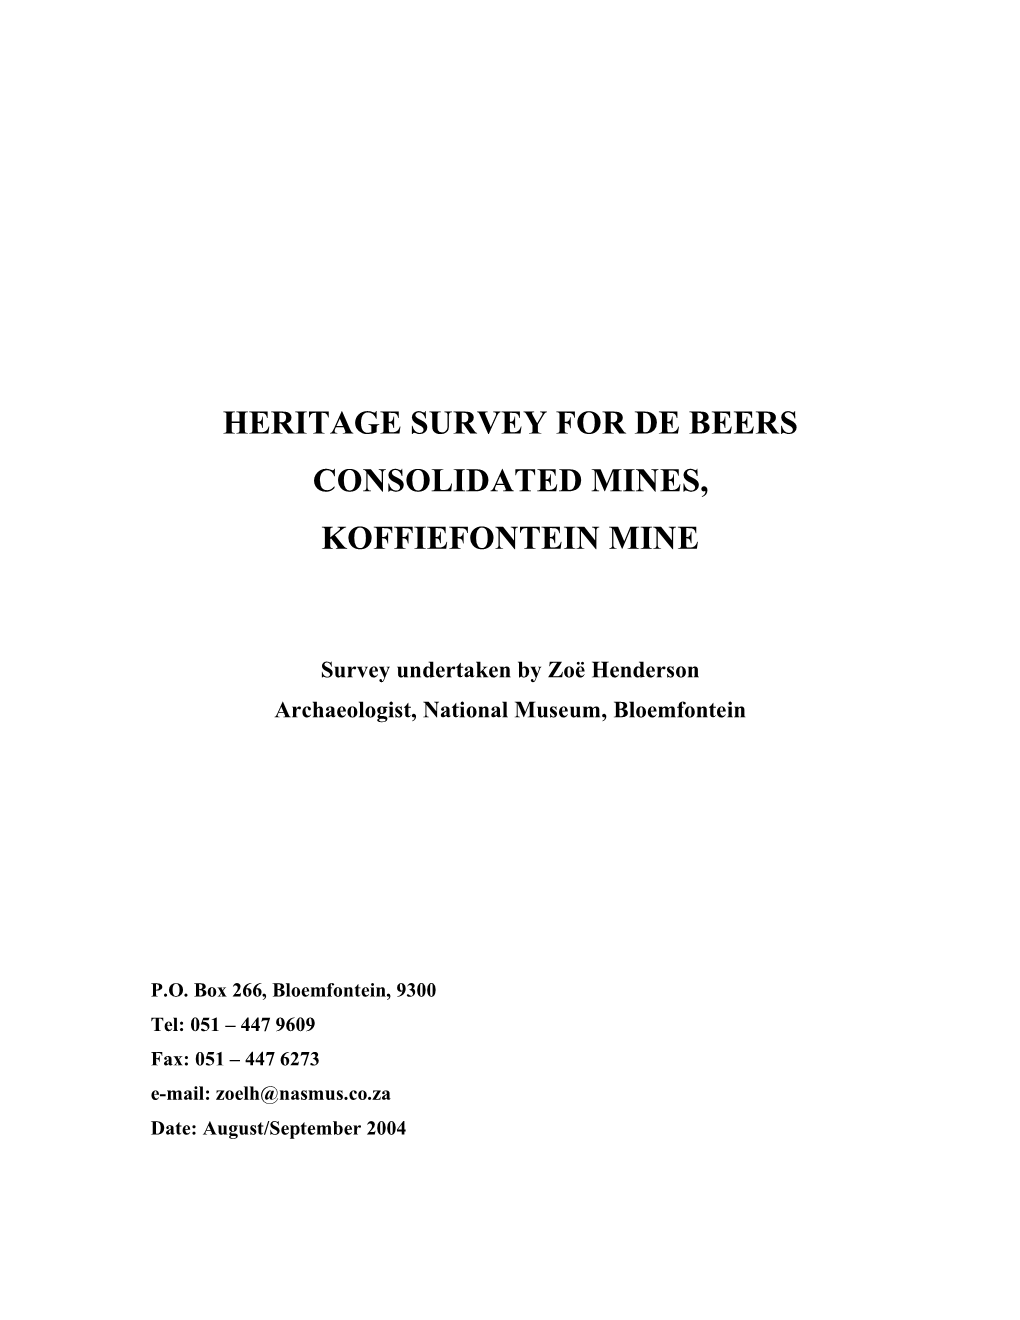 Heritage Survey for De Beers Consolidated Mines, Koffiefontein Mine